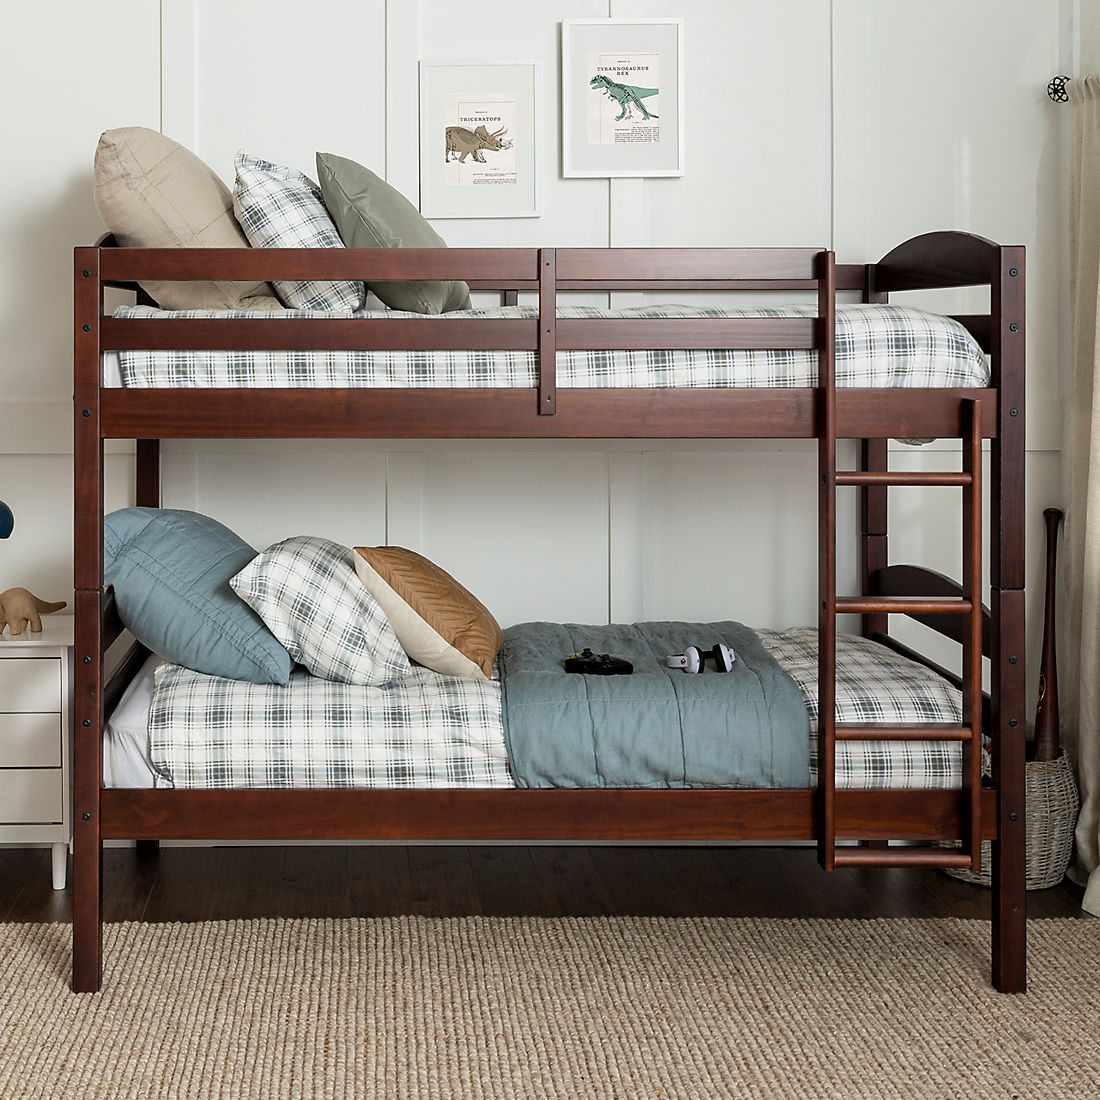 W Trends Twin Size Solid Wood Bunk Bed, Twin Size Wooden Bunk Beds